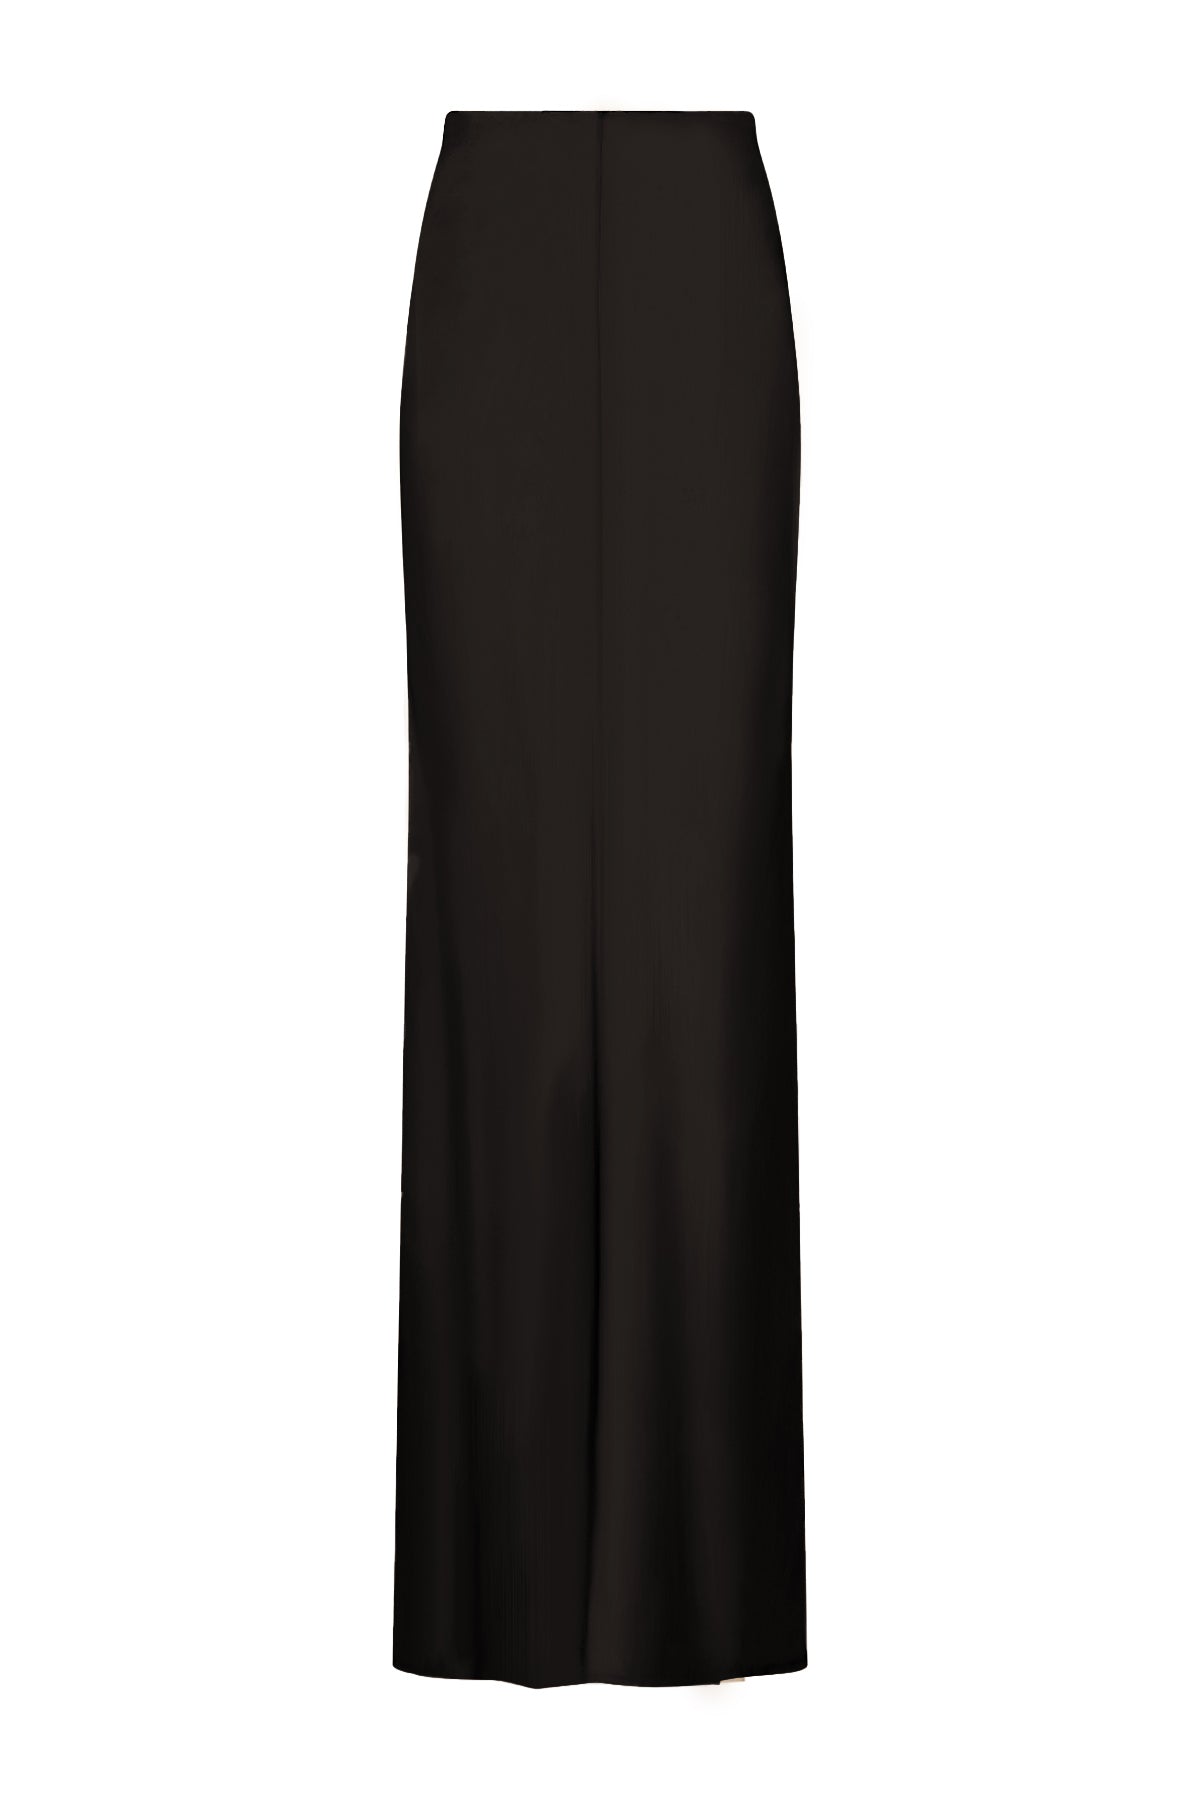 A Laurina Skirt Black with an invisible zipper on a white background.